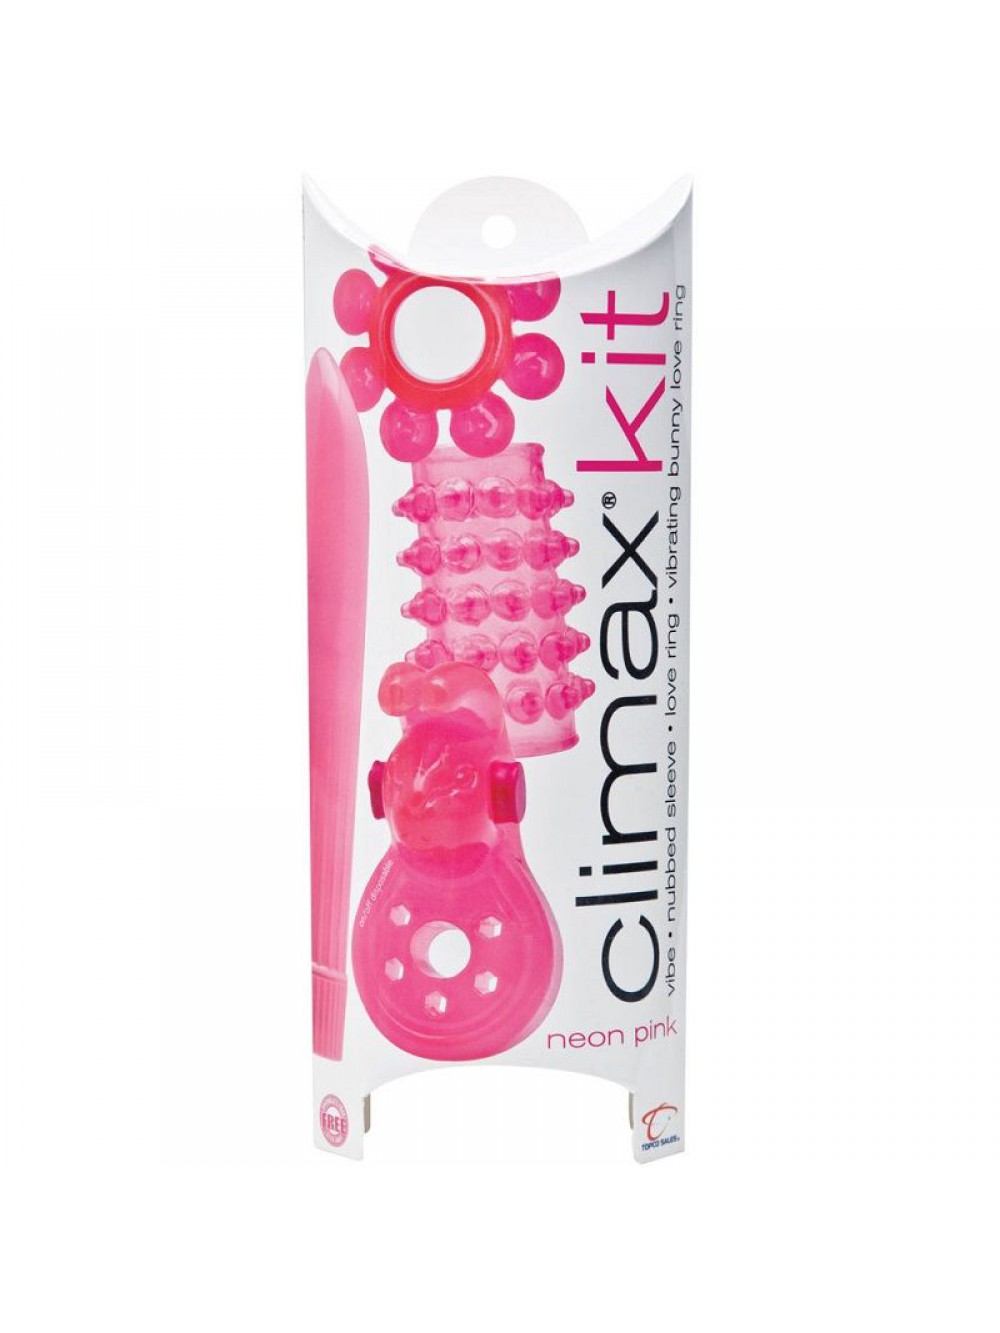 TOPCO CLIMAX KIT NEON PINK 051021480029